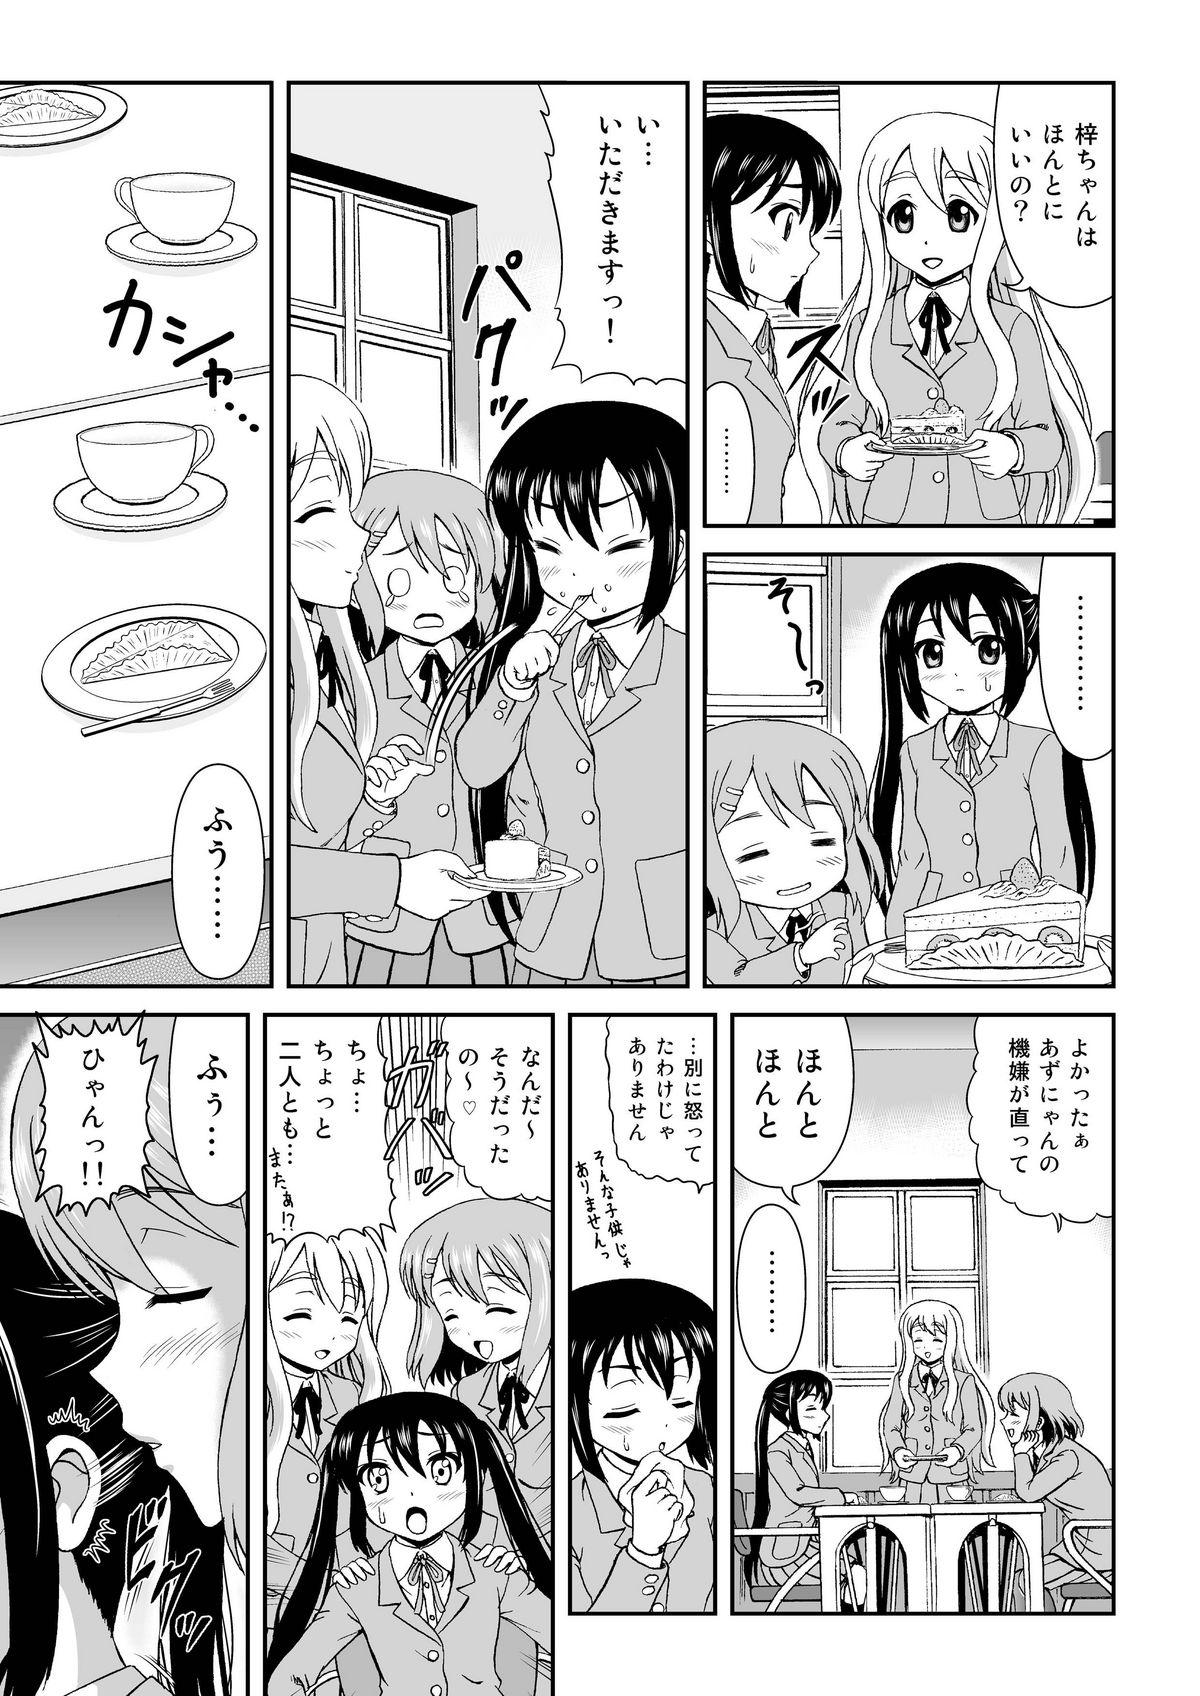 Tease Houkago Off Time - K-on Teenxxx - Page 9